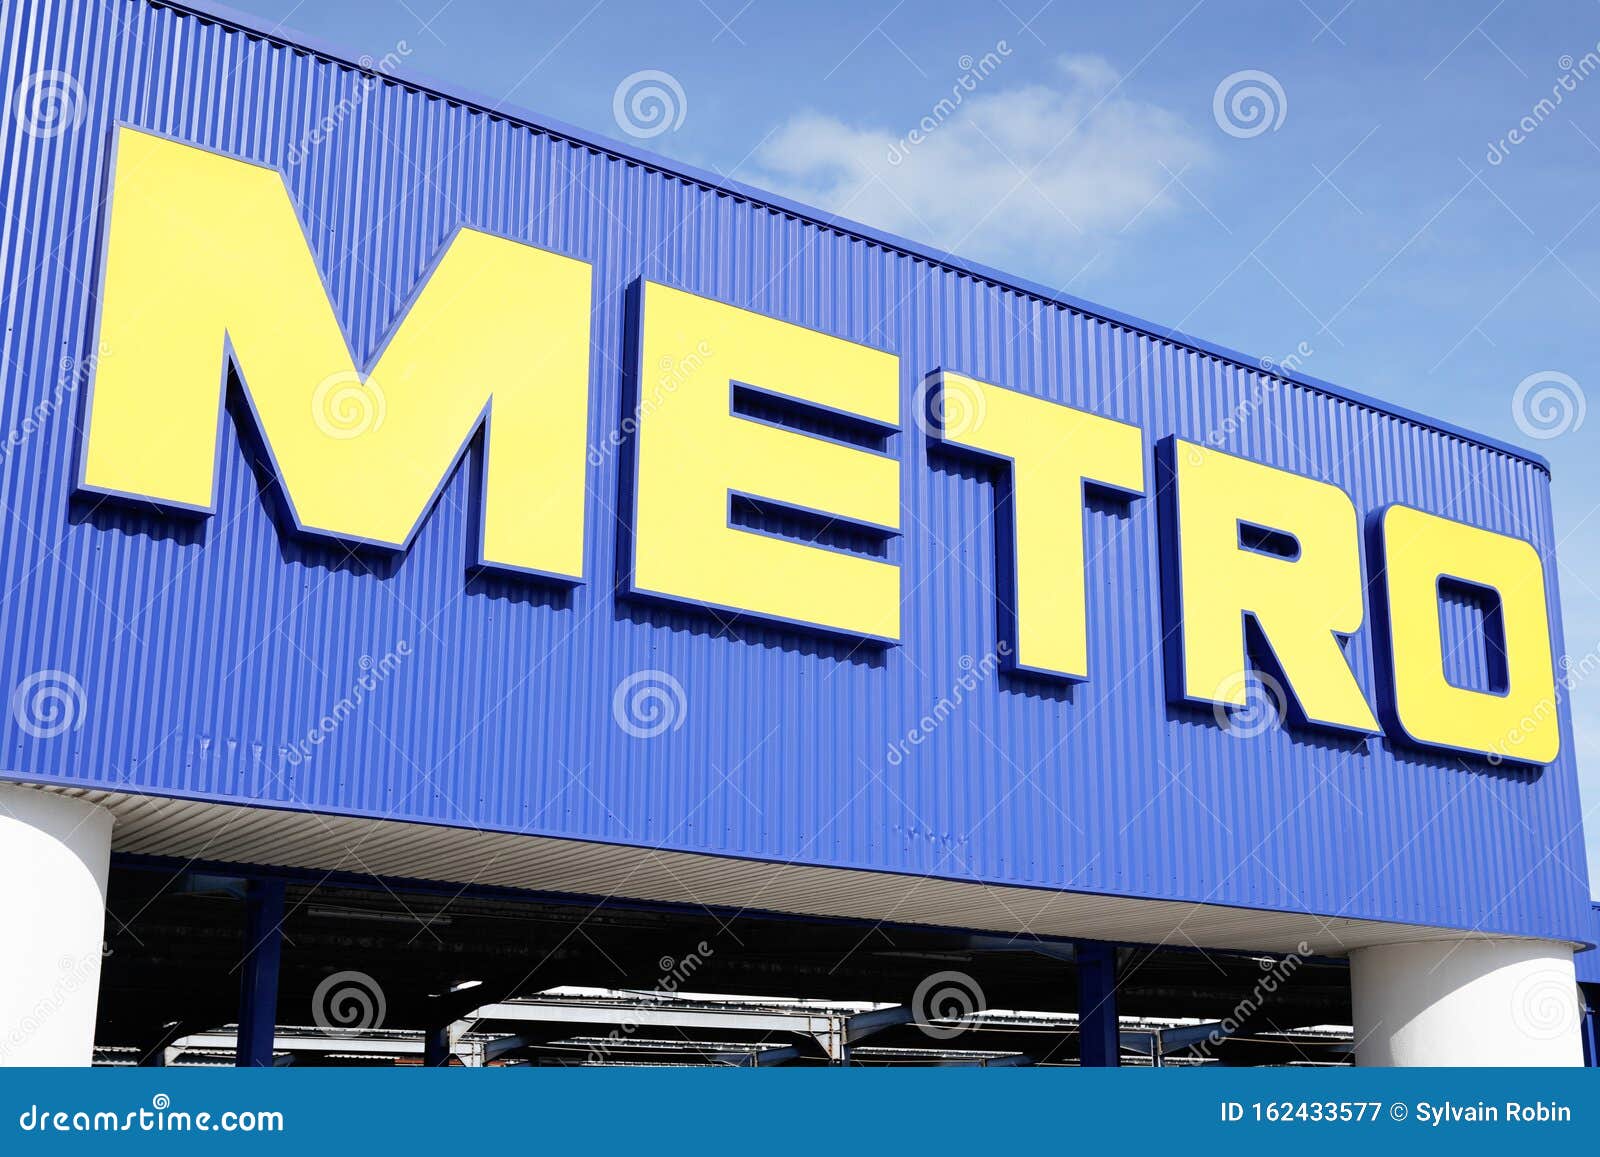 Bordeaux , Aquitaine / France - 10 28 2019 : Metro Cash and Carry Sign Logo Sales Division Store German Trade Retail Photography - Image of item, company: 162433577